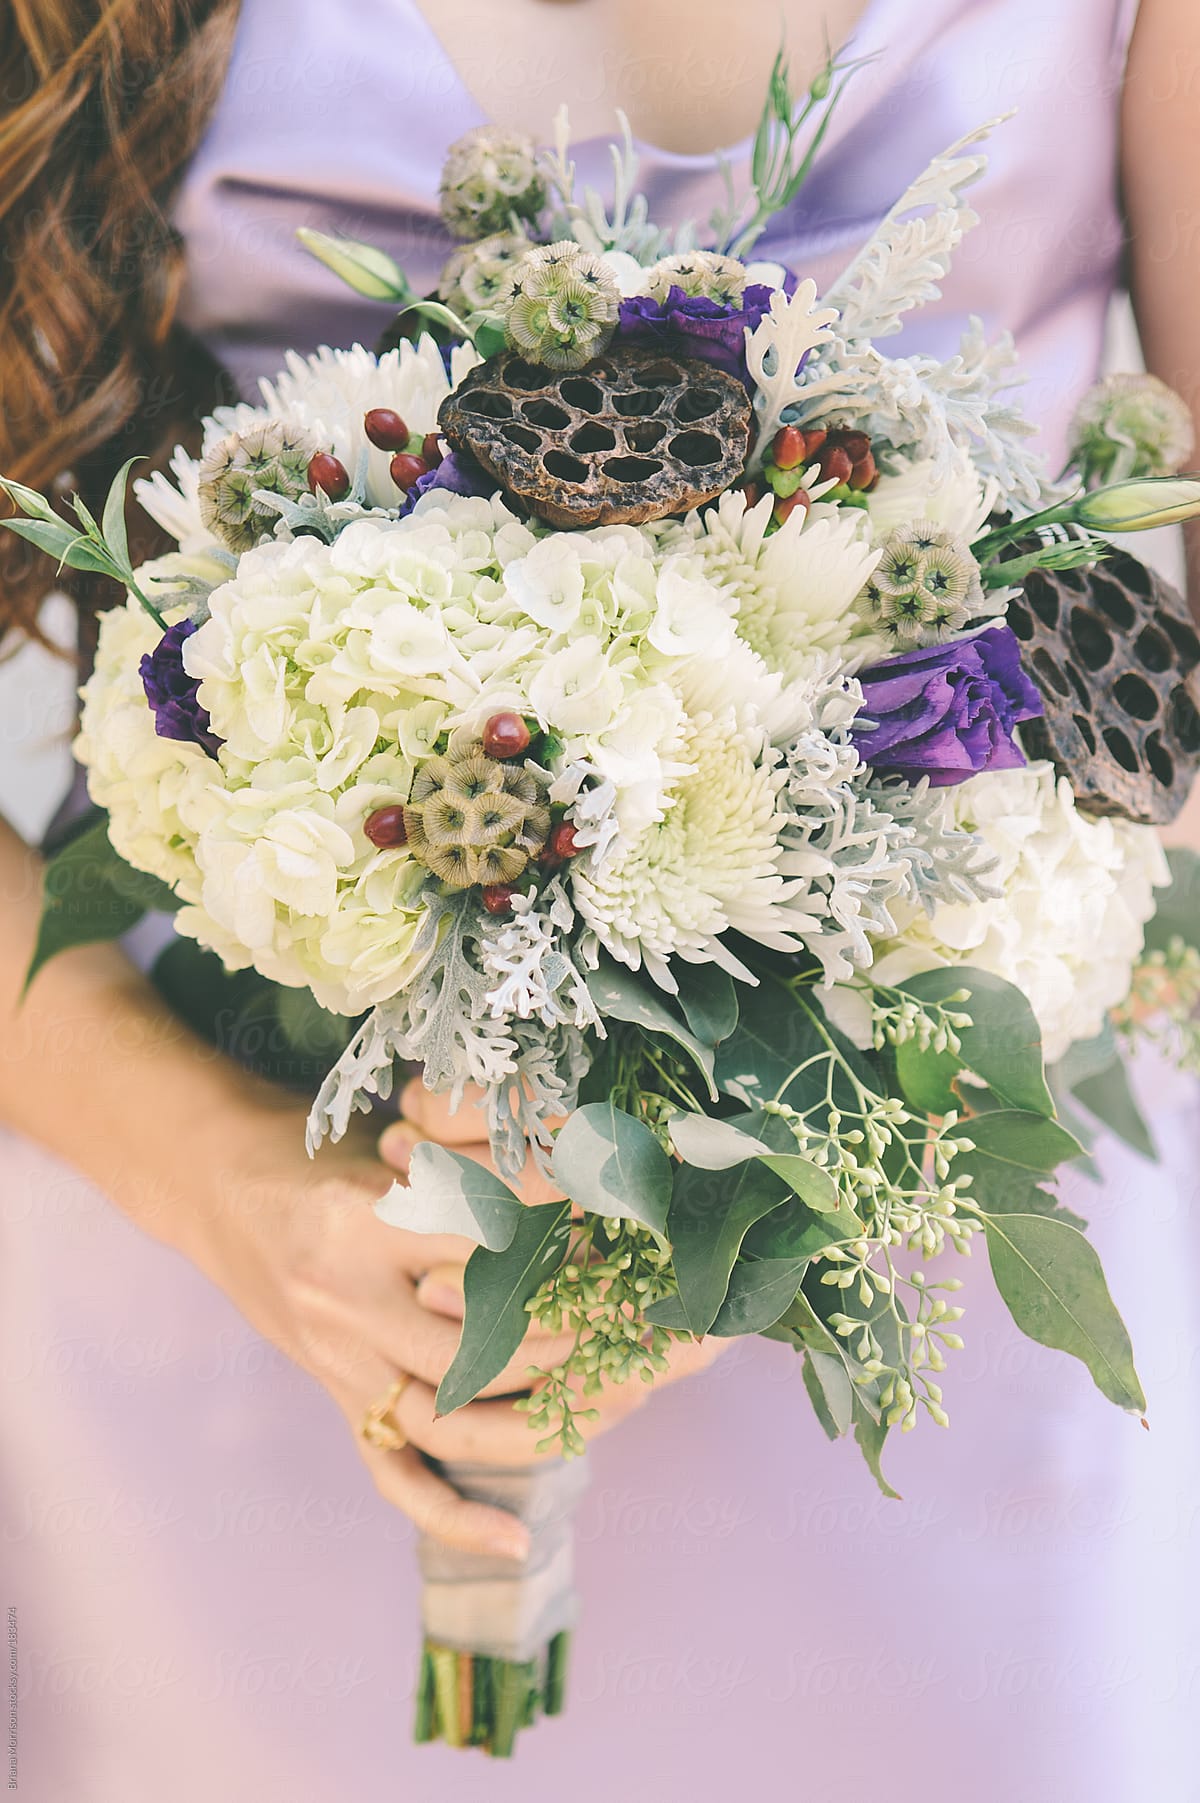 Woman in Purple Dress Holding White and Green Bouquet